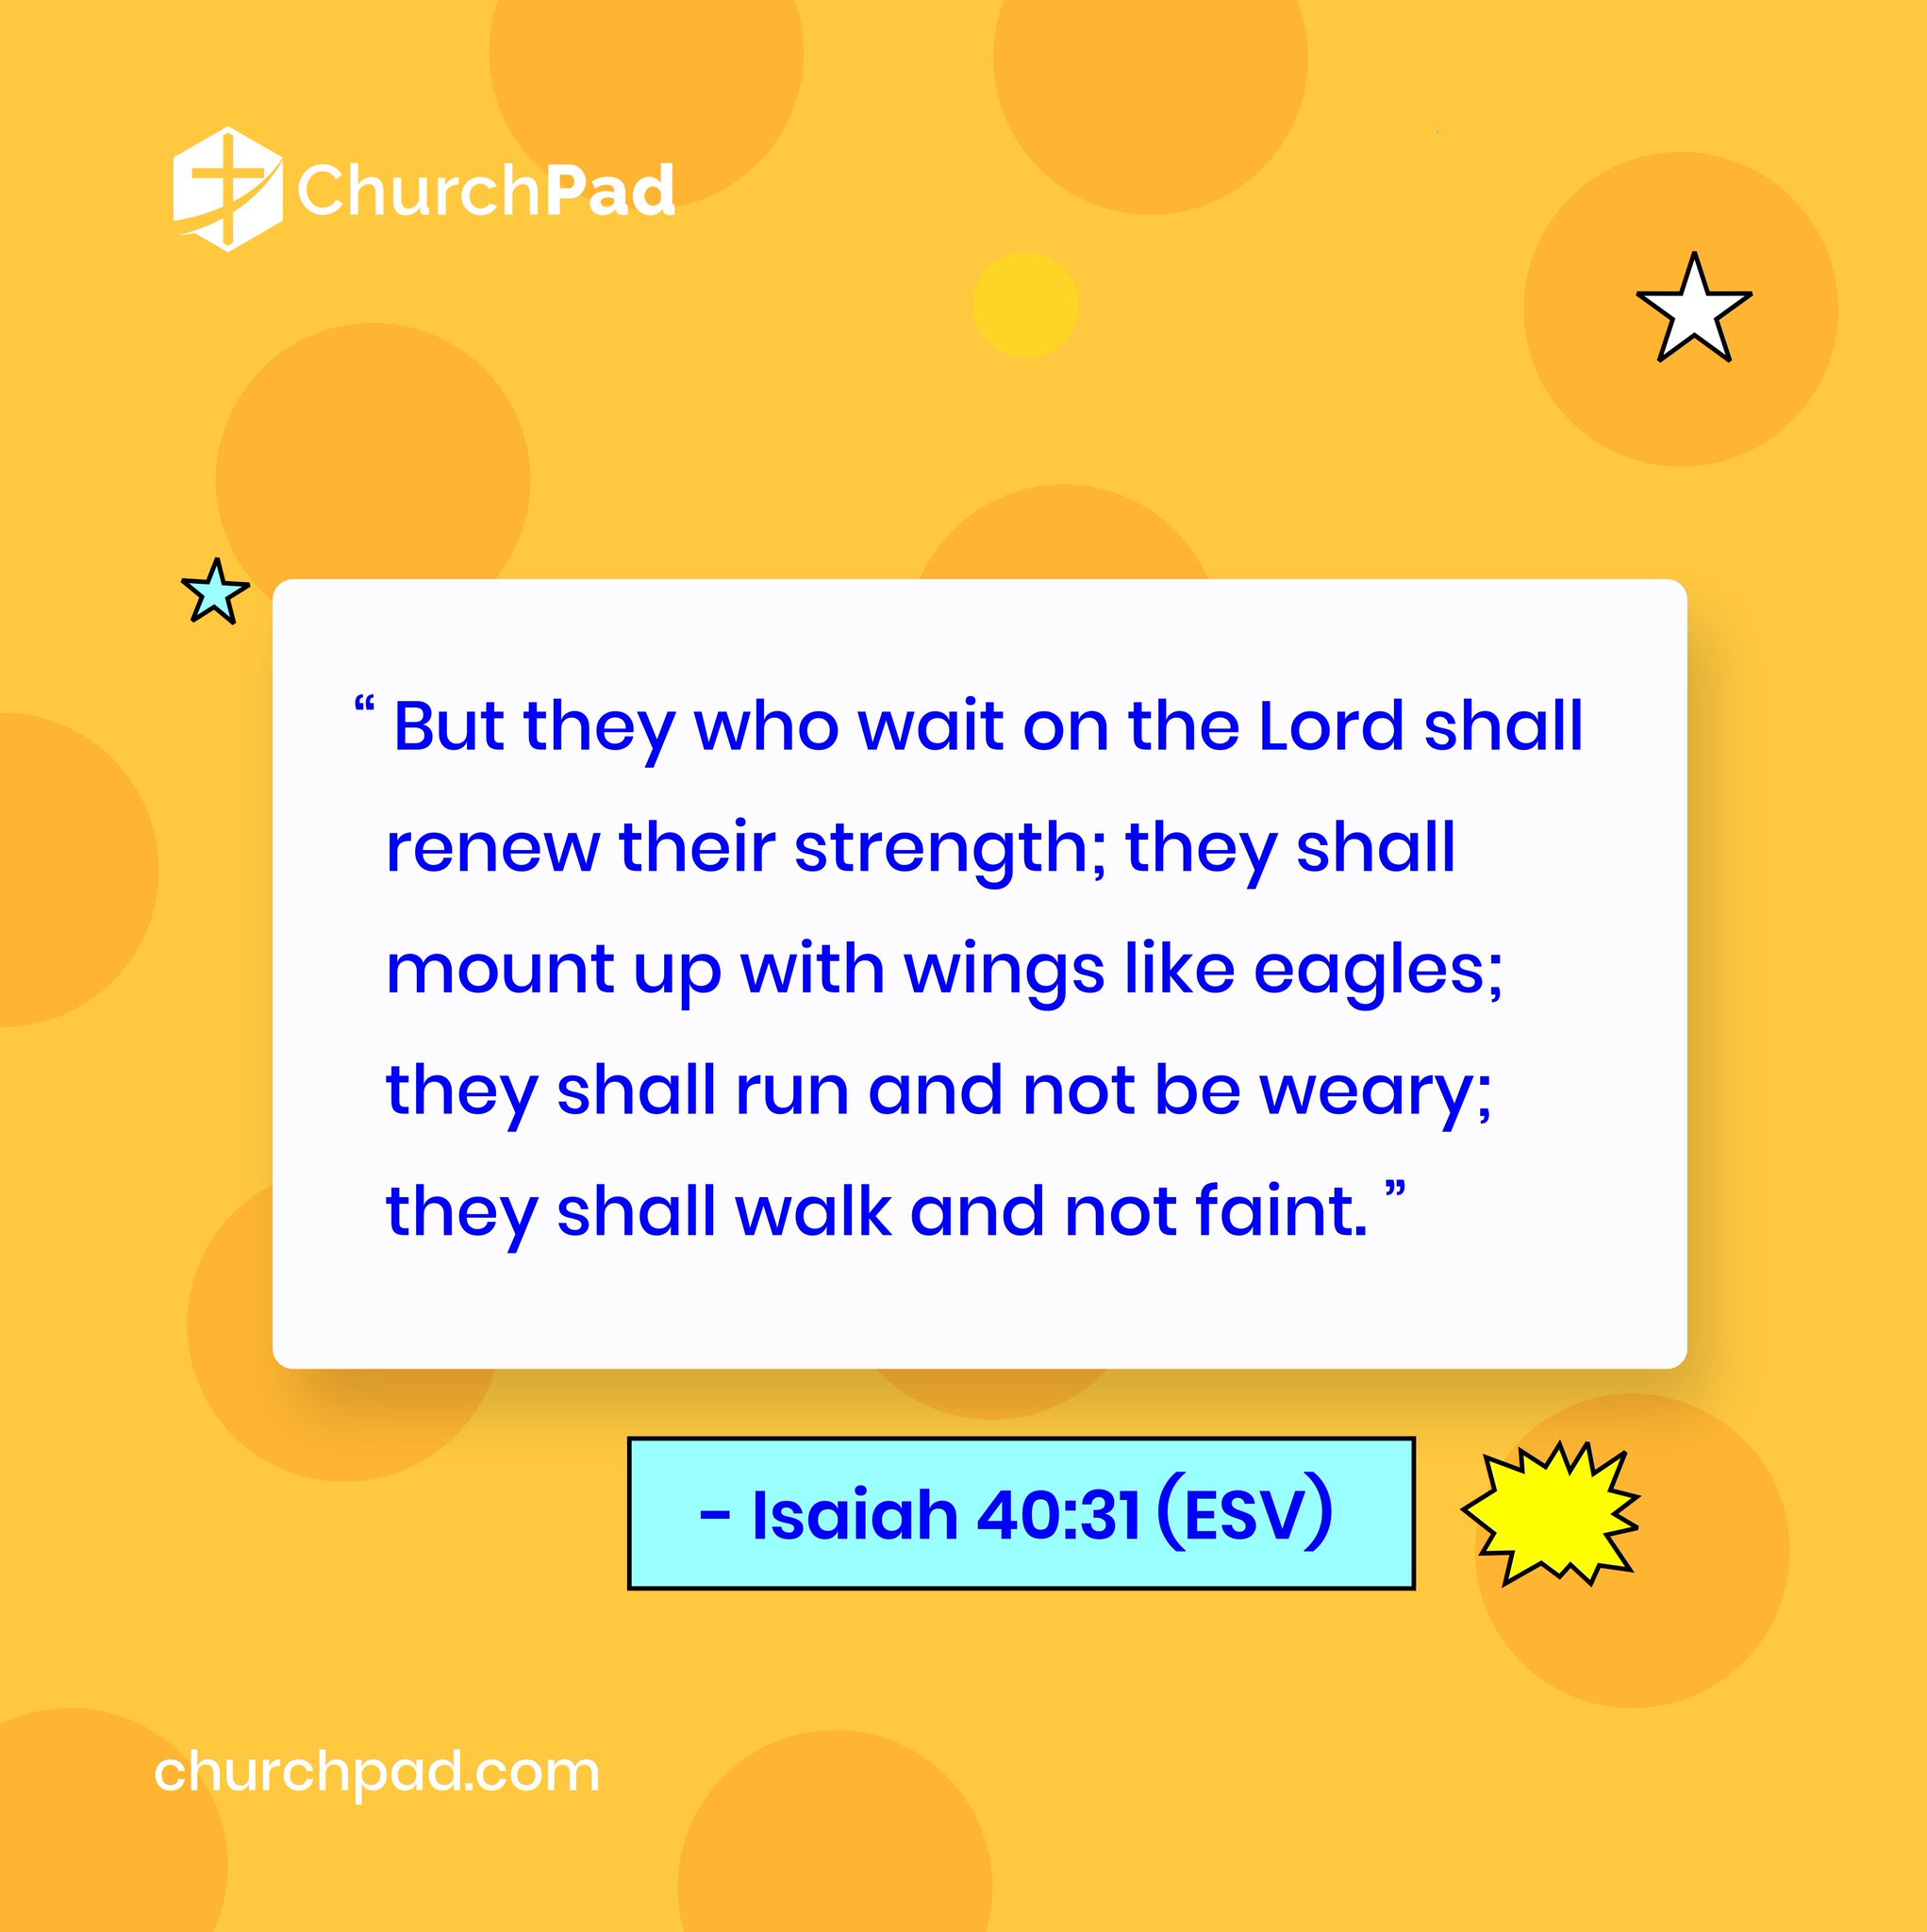 ChurchPad But they who wait on the Lord shall renew their strength; shall mount up with wings like eagles; they shall run and not be weary; shall walk and not faint Isaiah 40.31 (ESV) churchpad com they they